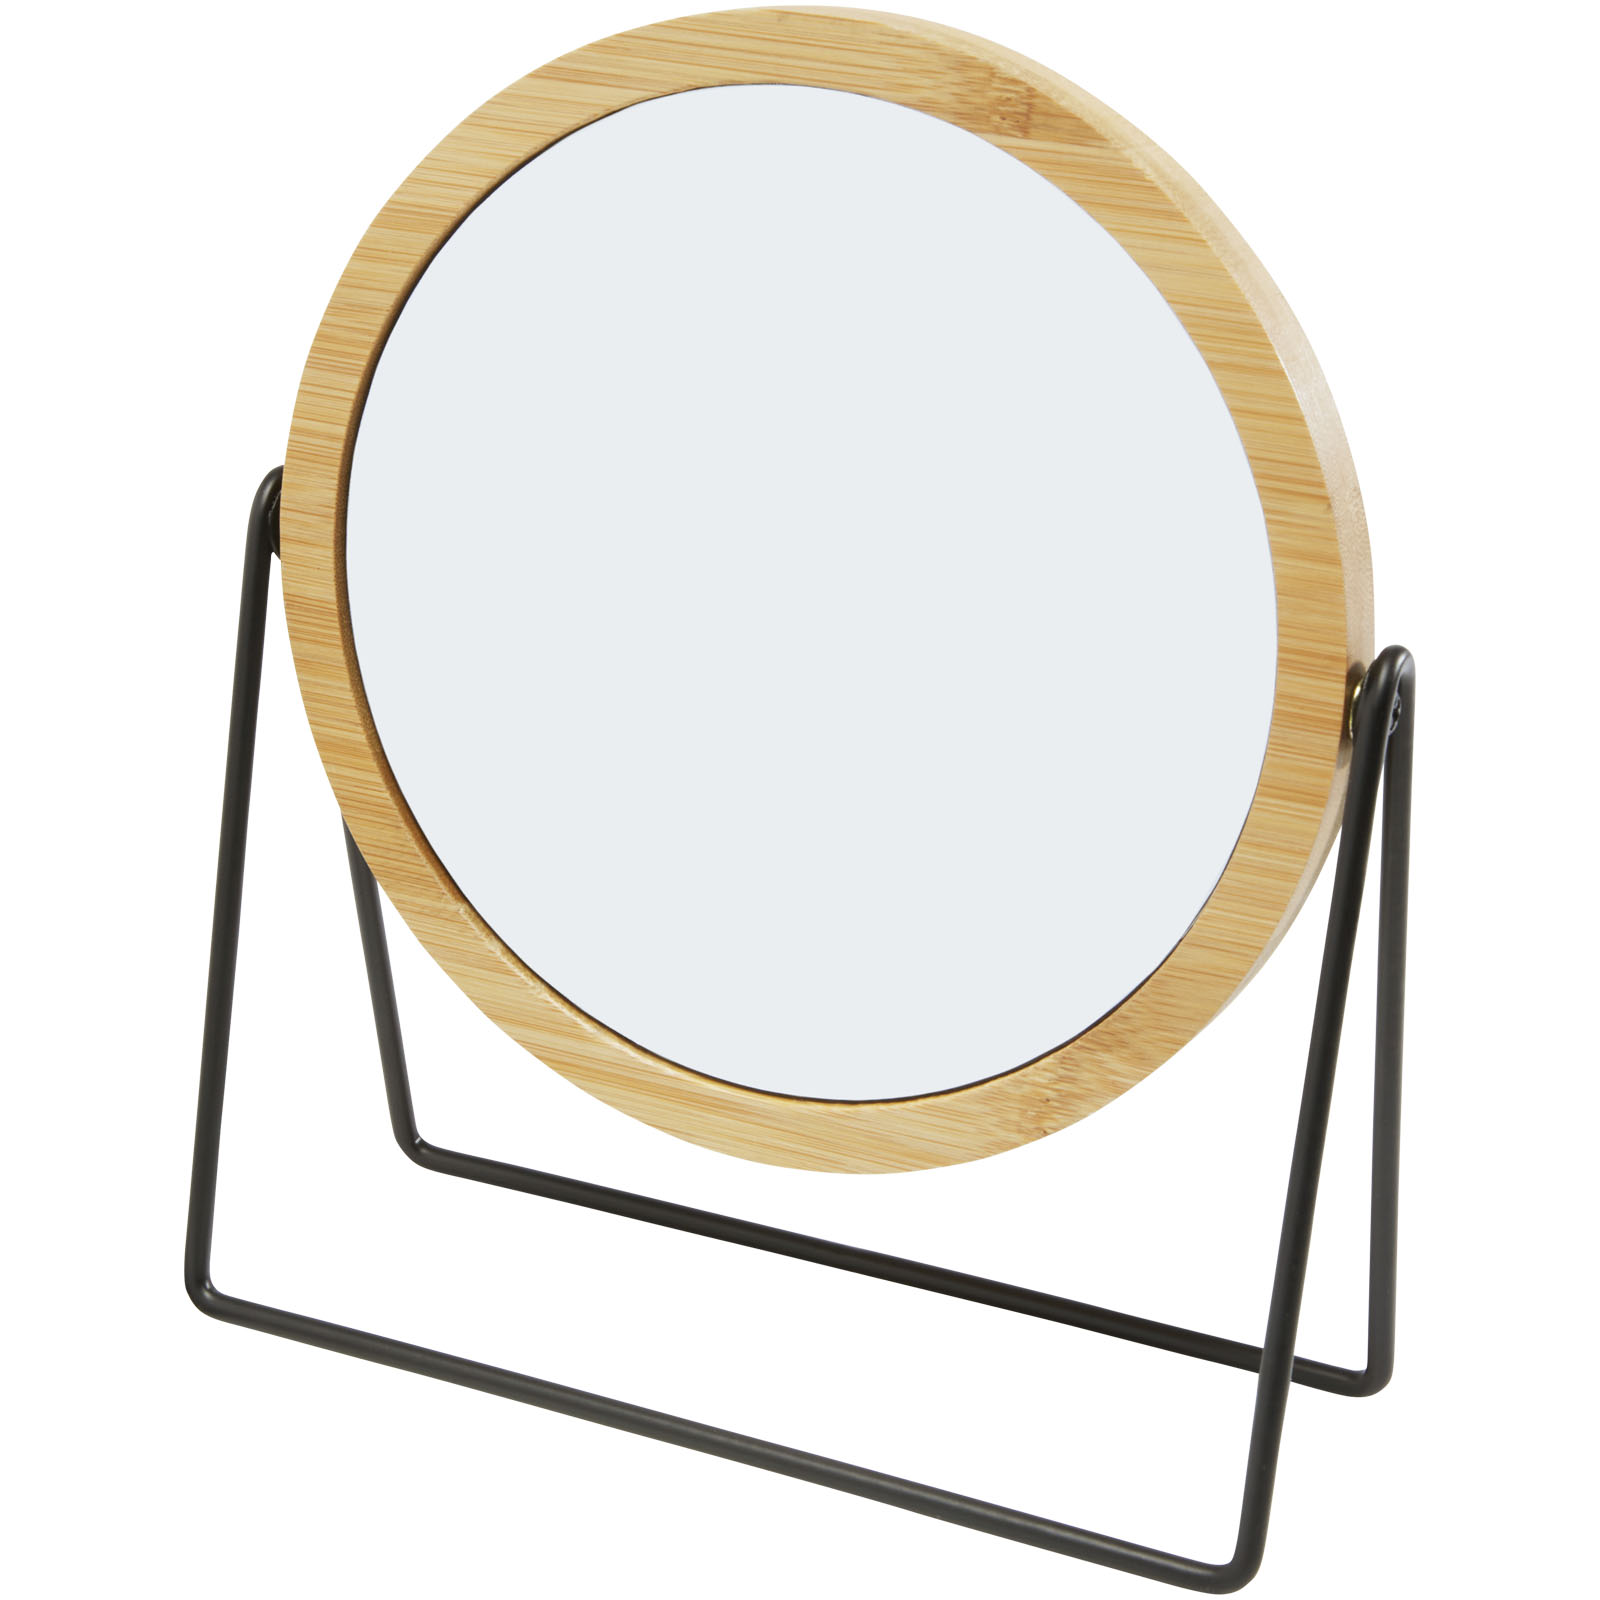 Advertising Personal Care - Hyrra bamboo standing mirror - 0